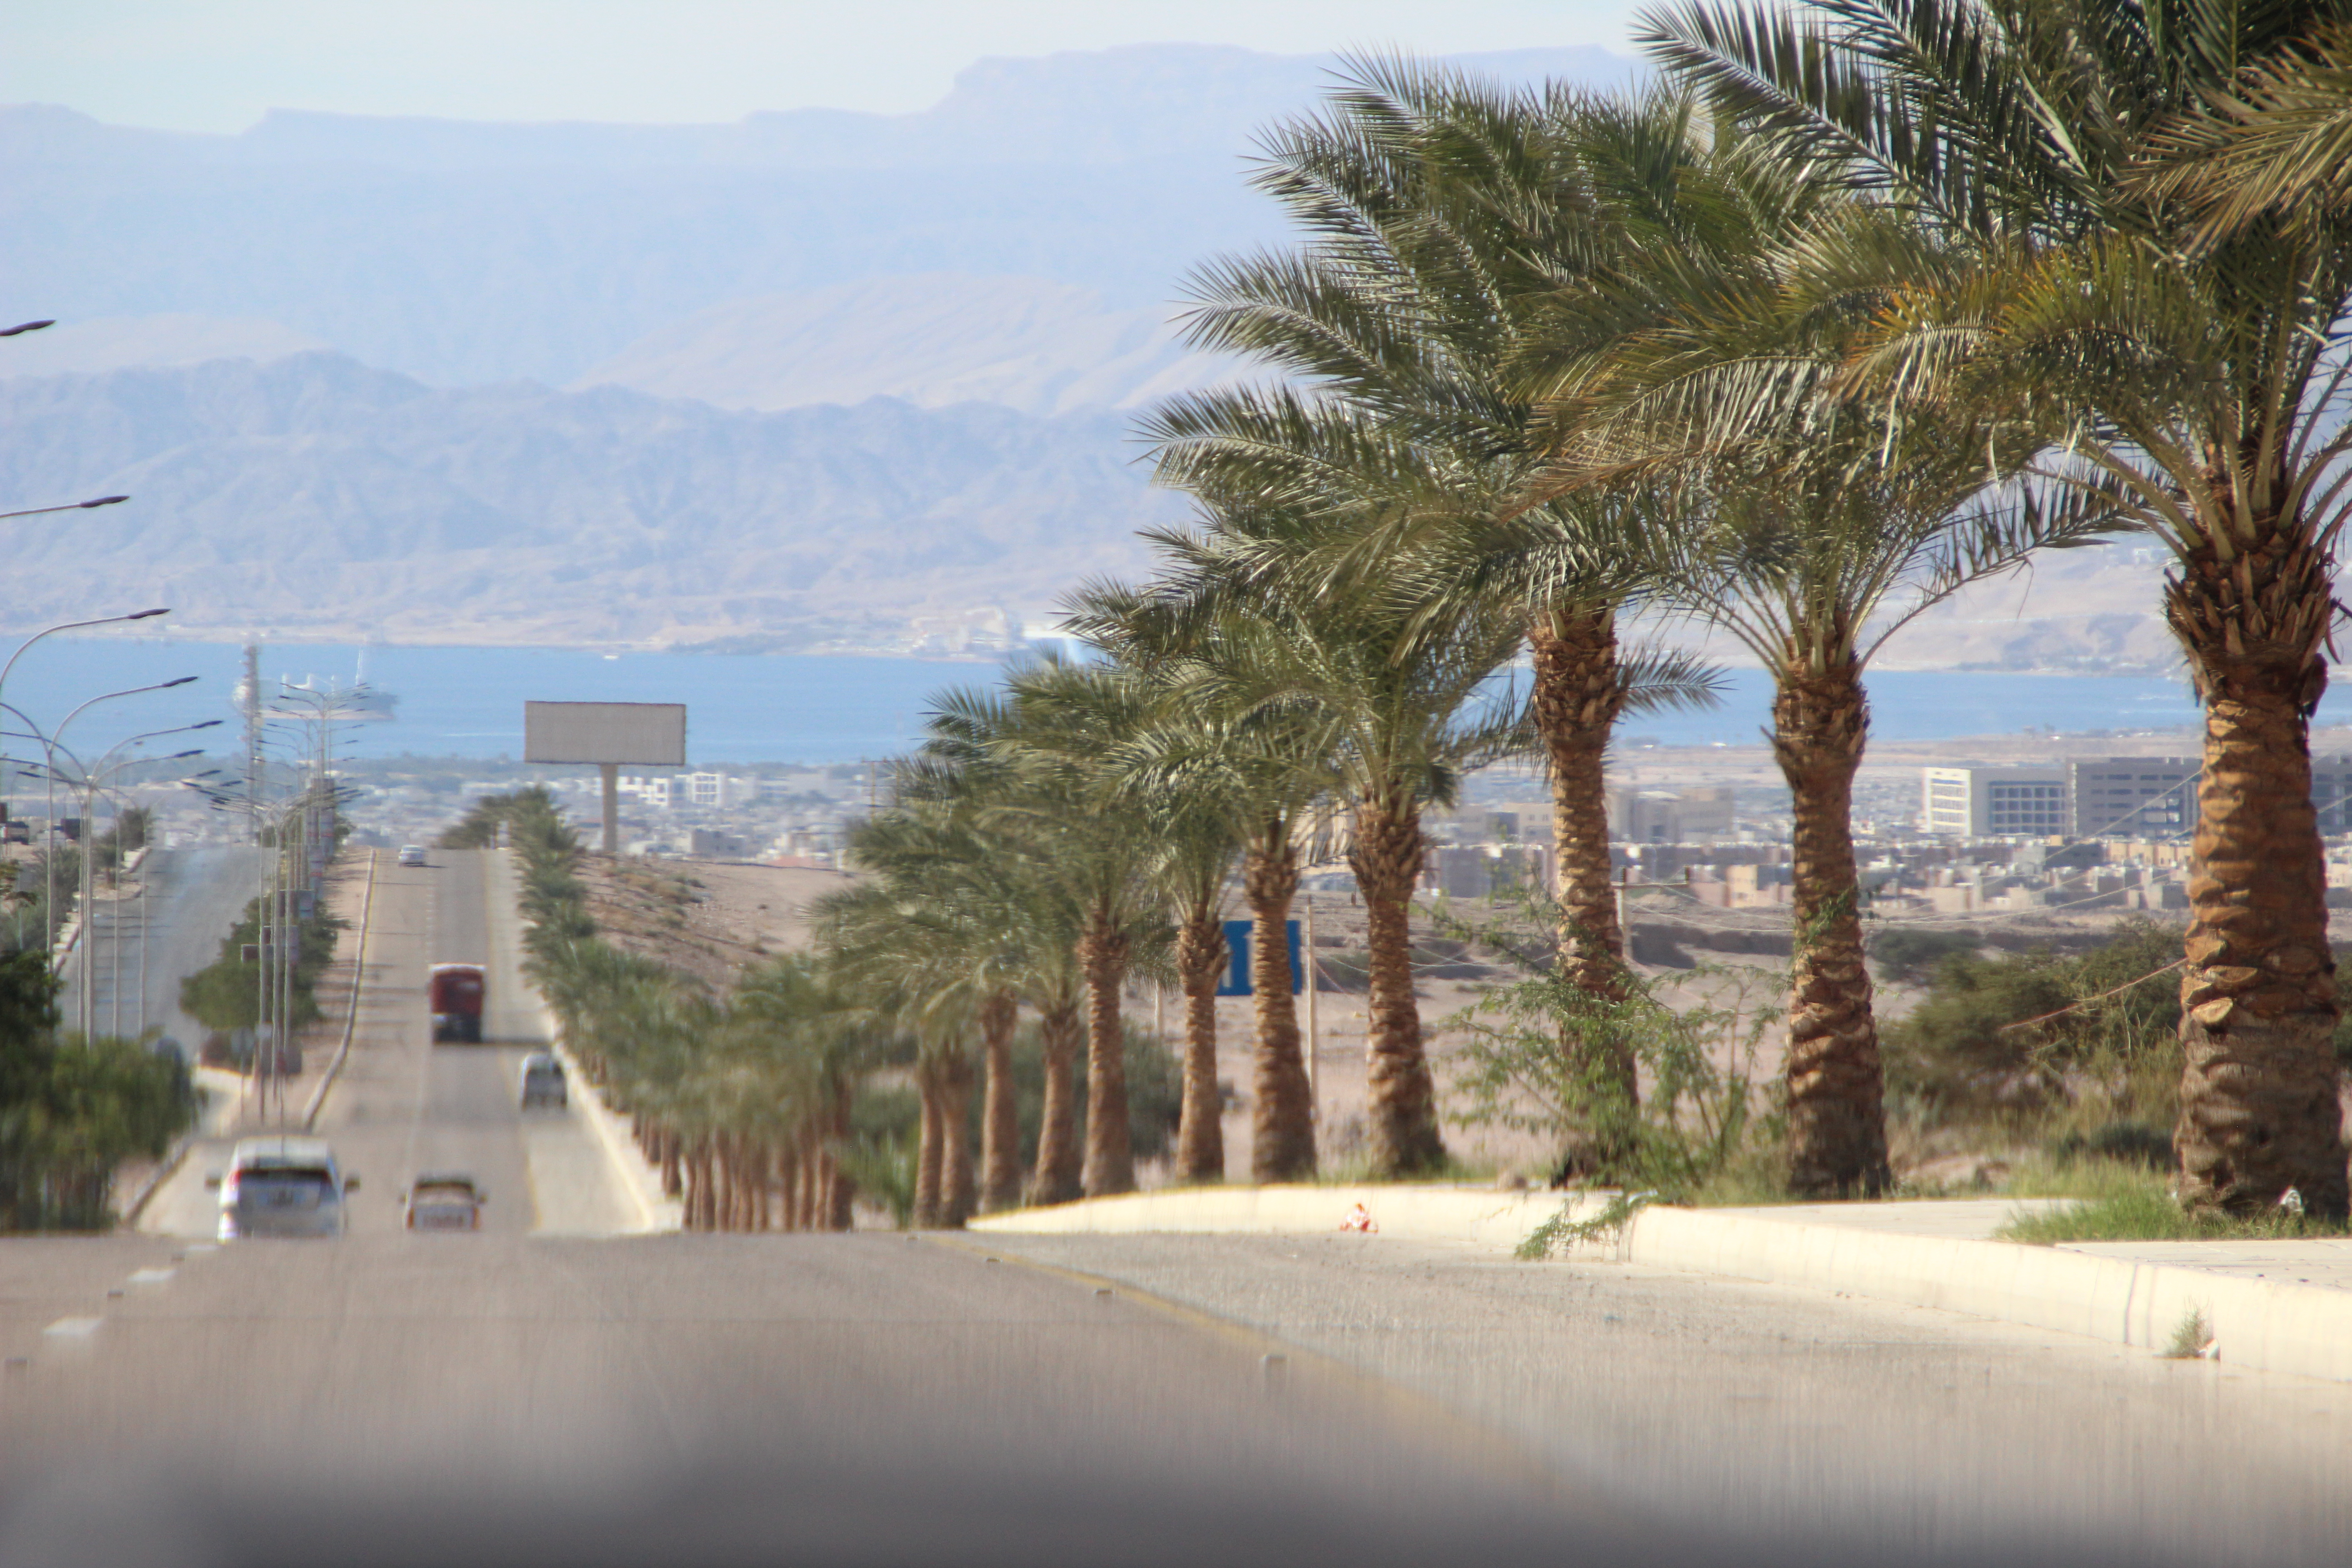 Arriving to Aqaba with the Red Sea at the end of the road